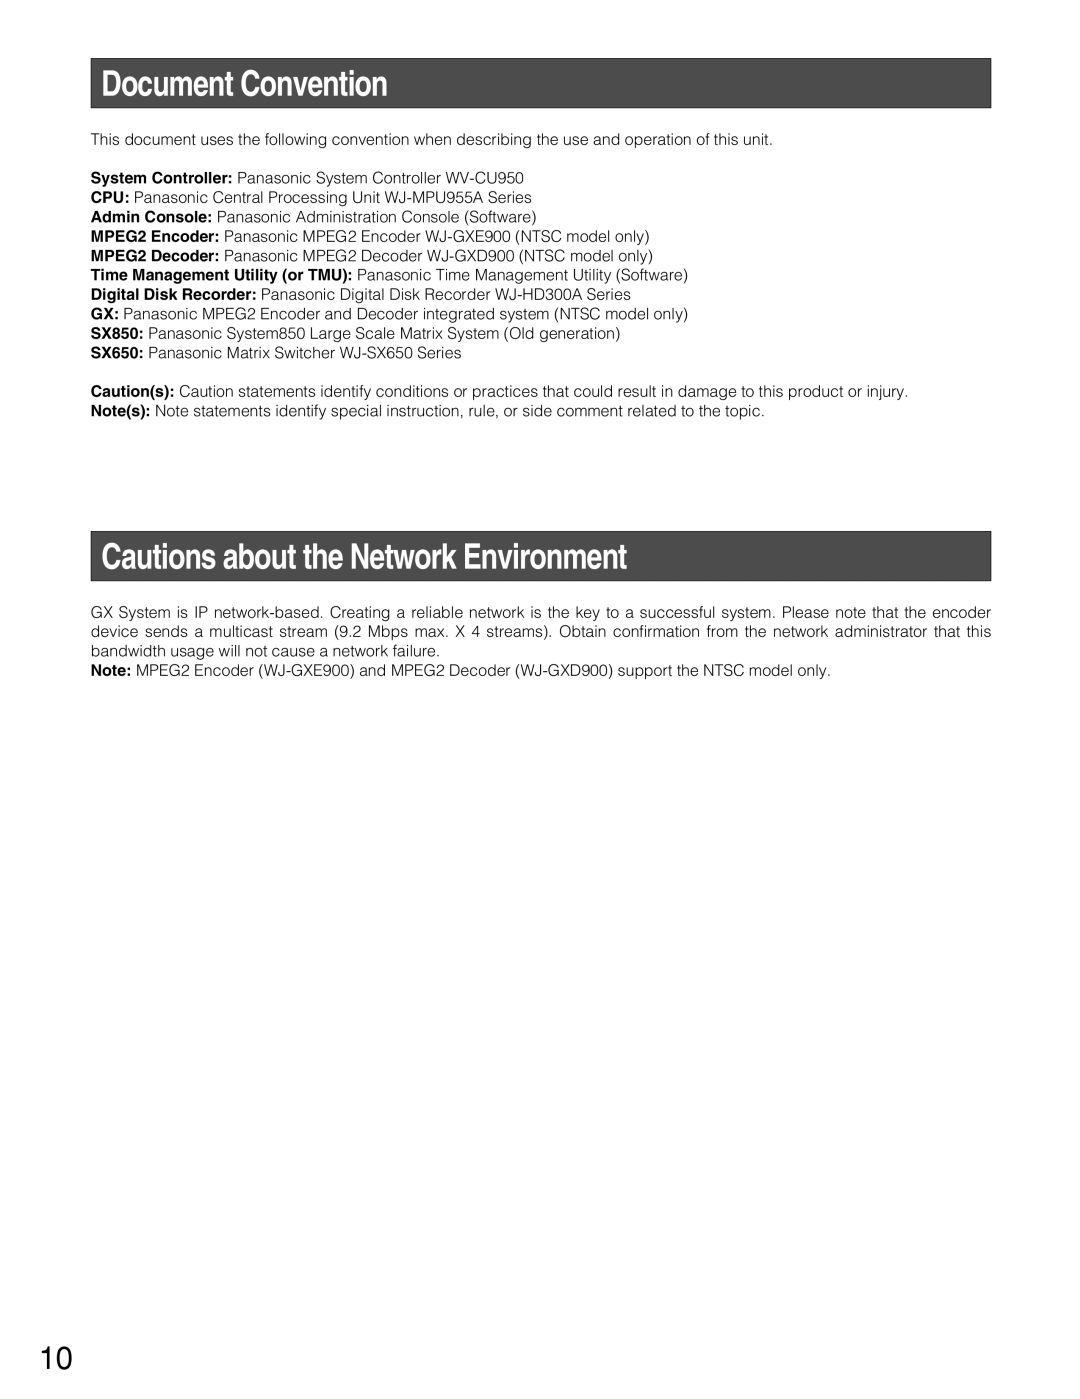 Panasonic WJ-MPU955A manual Document Convention, Cautions about the Network Environment 